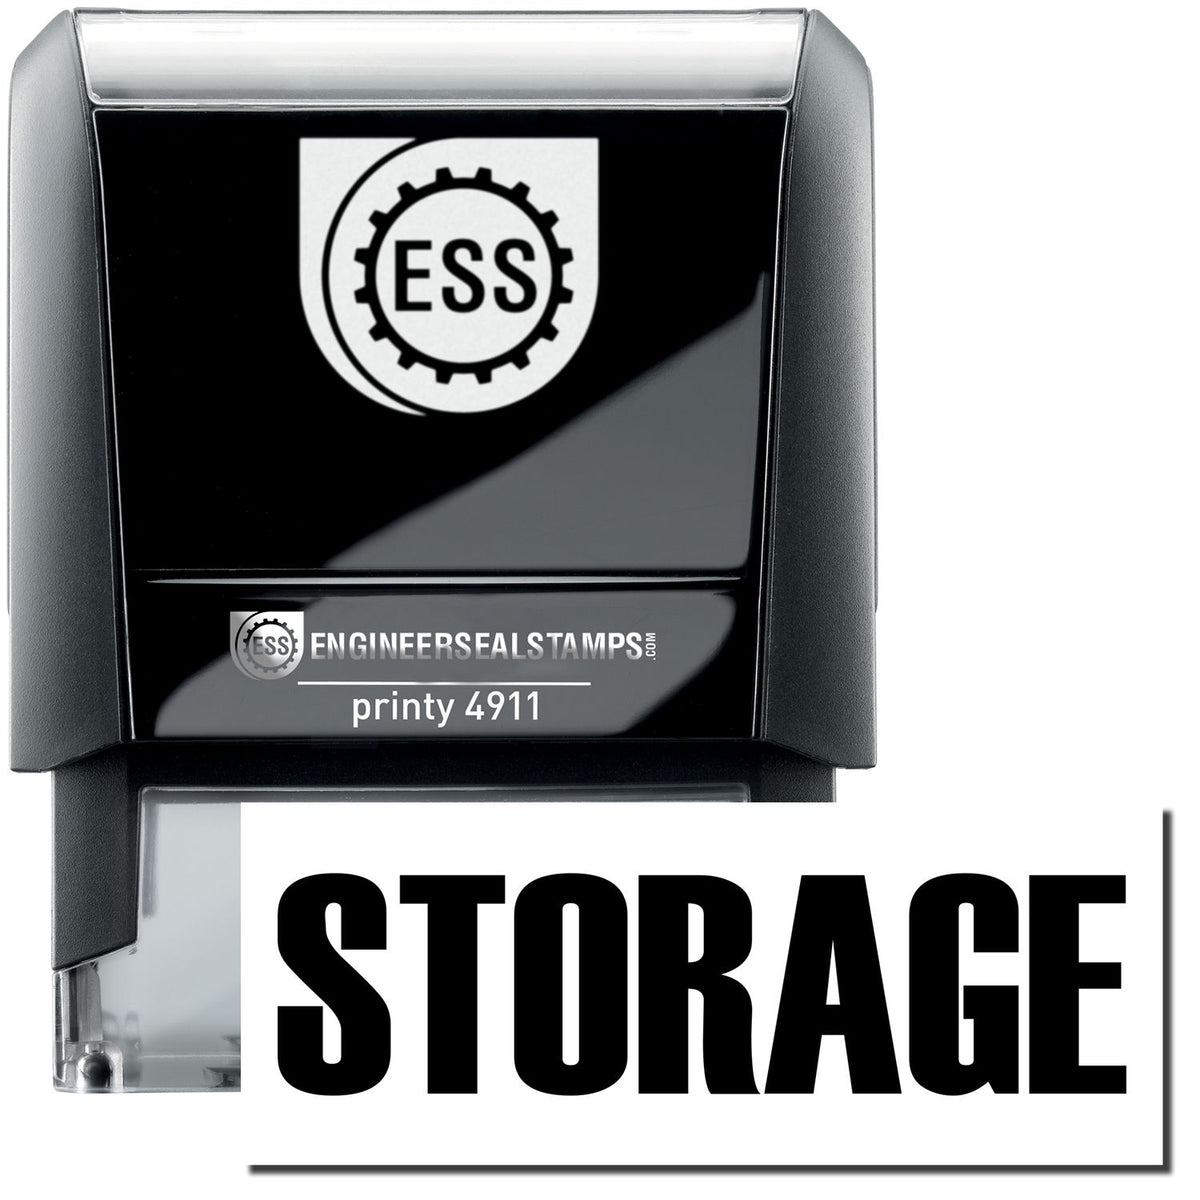 A self-inking stamp with a stamped image showing how the text &quot;STORAGE&quot; is displayed after stamping.